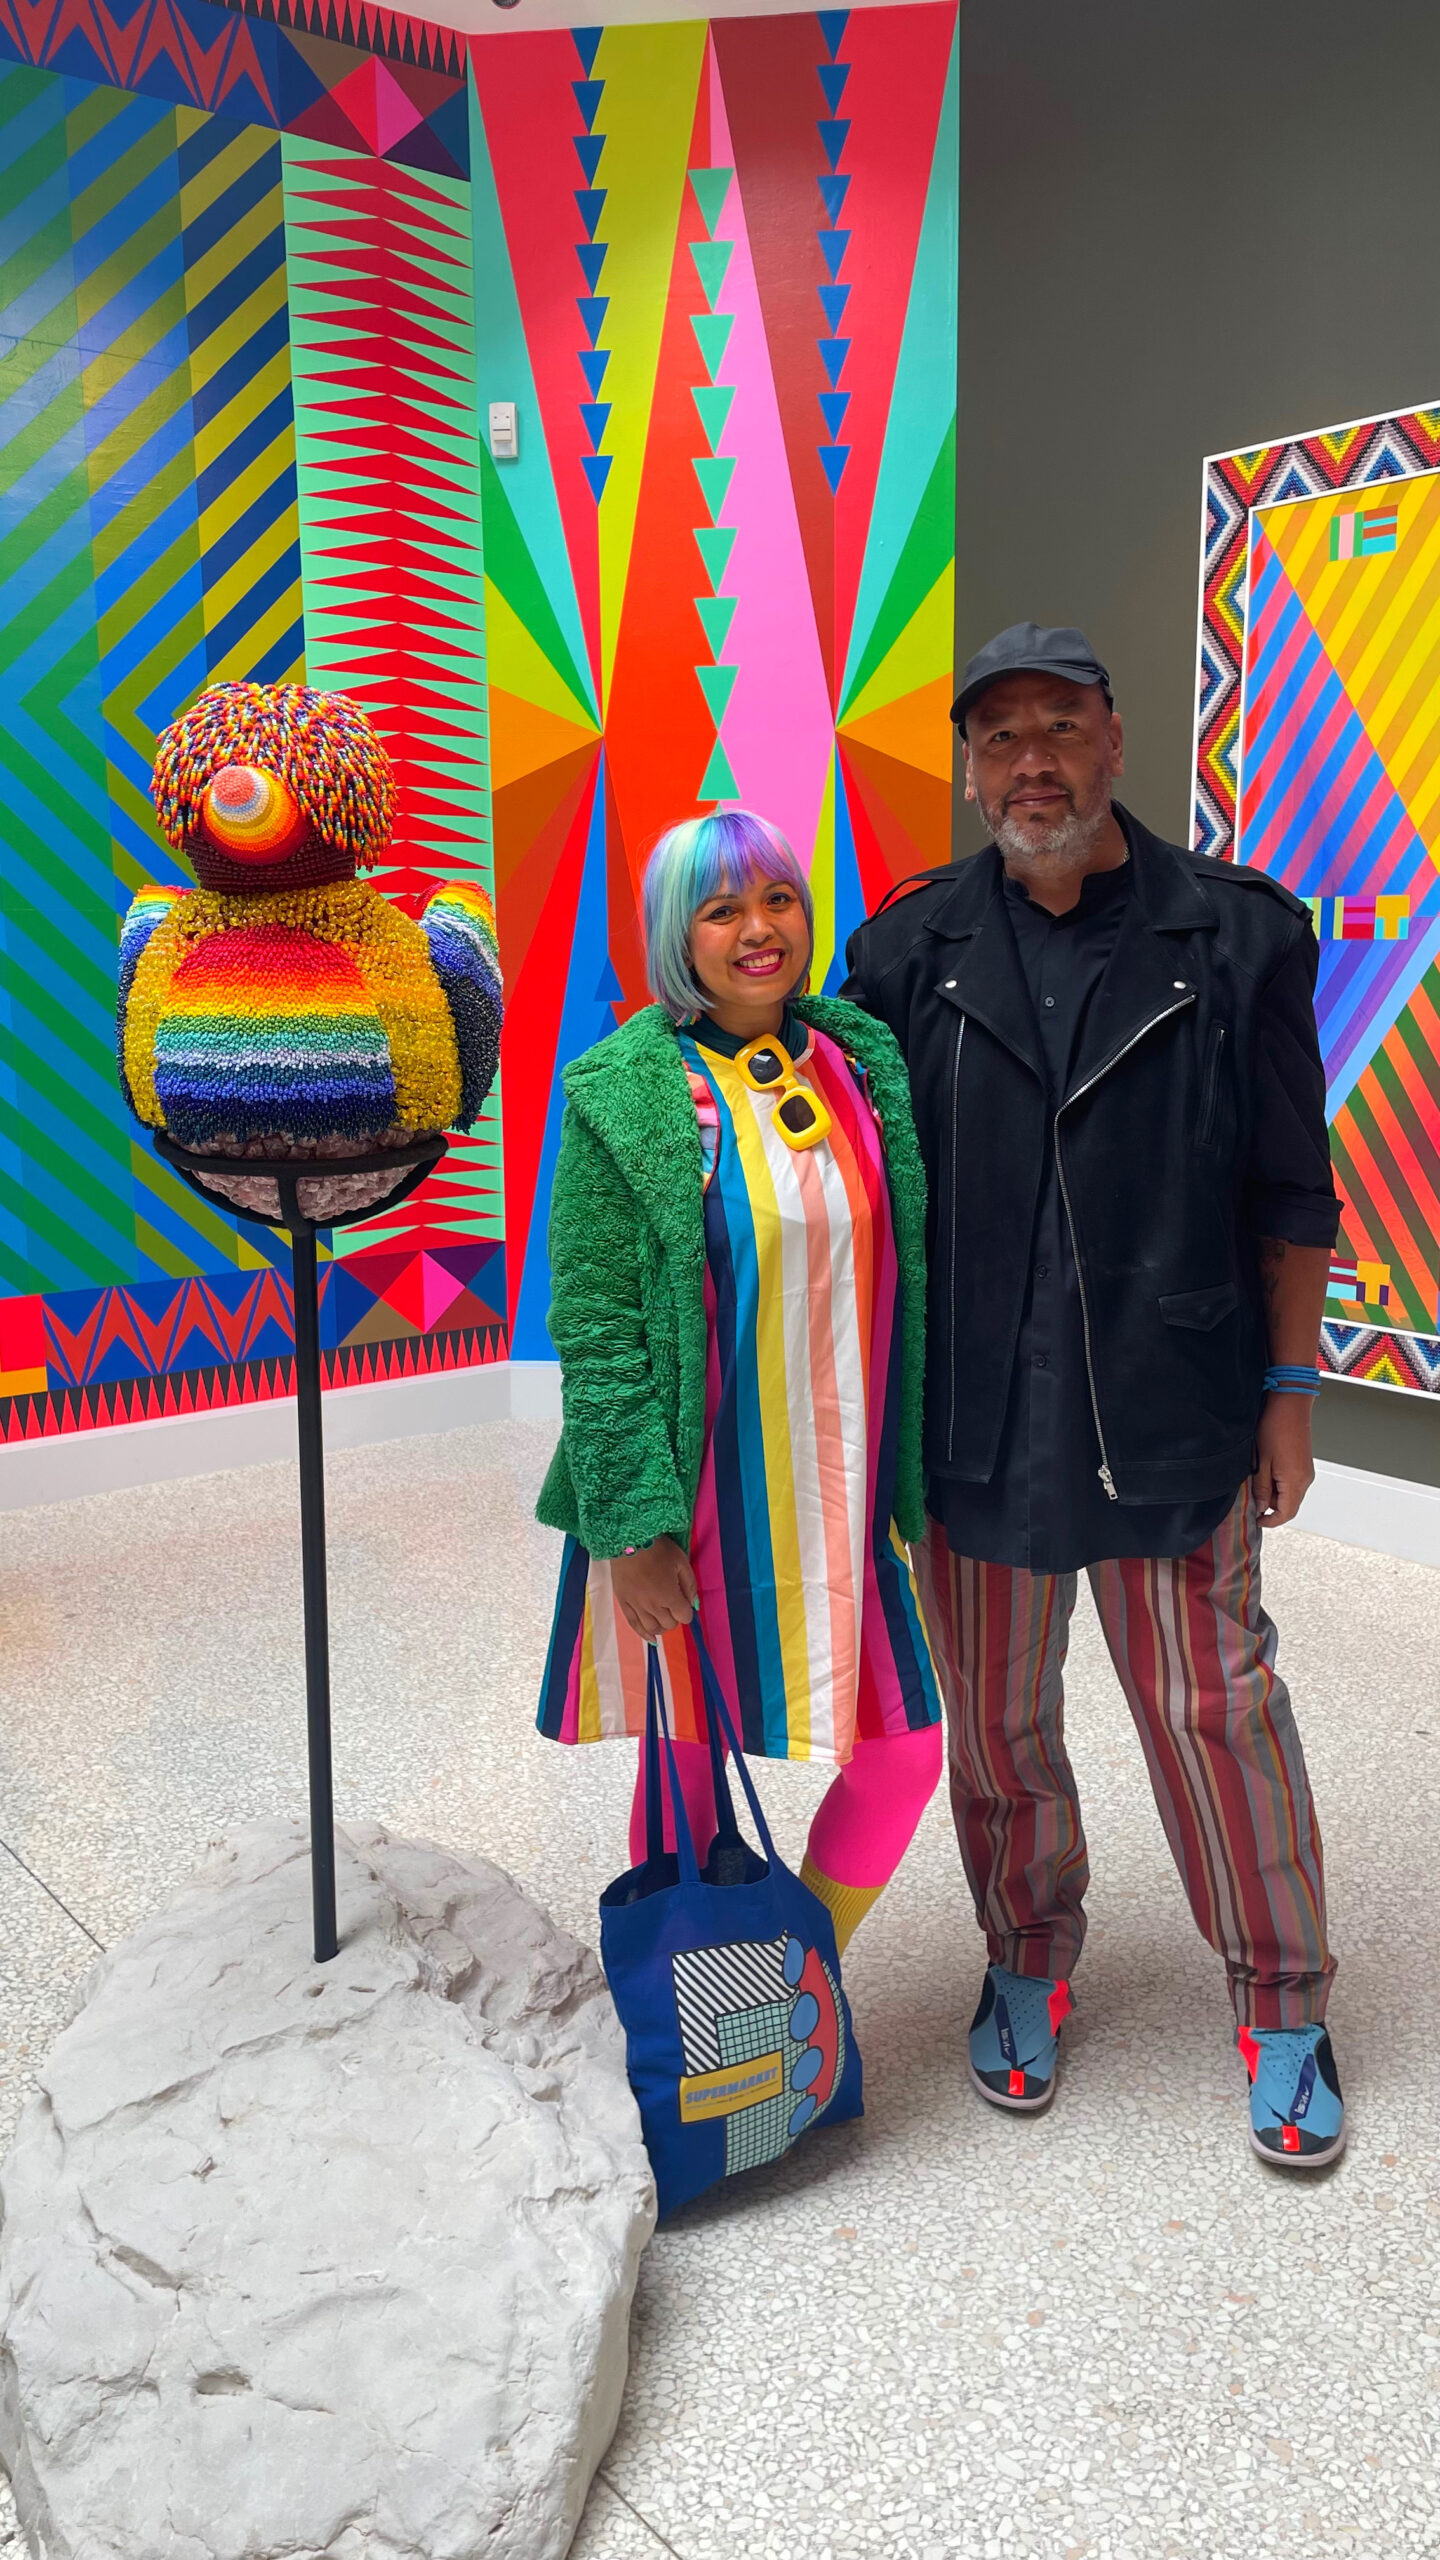 writer standing next to the artist, she is wearing a stripey dress and he has stripey trousers they stand next to his beaded duck